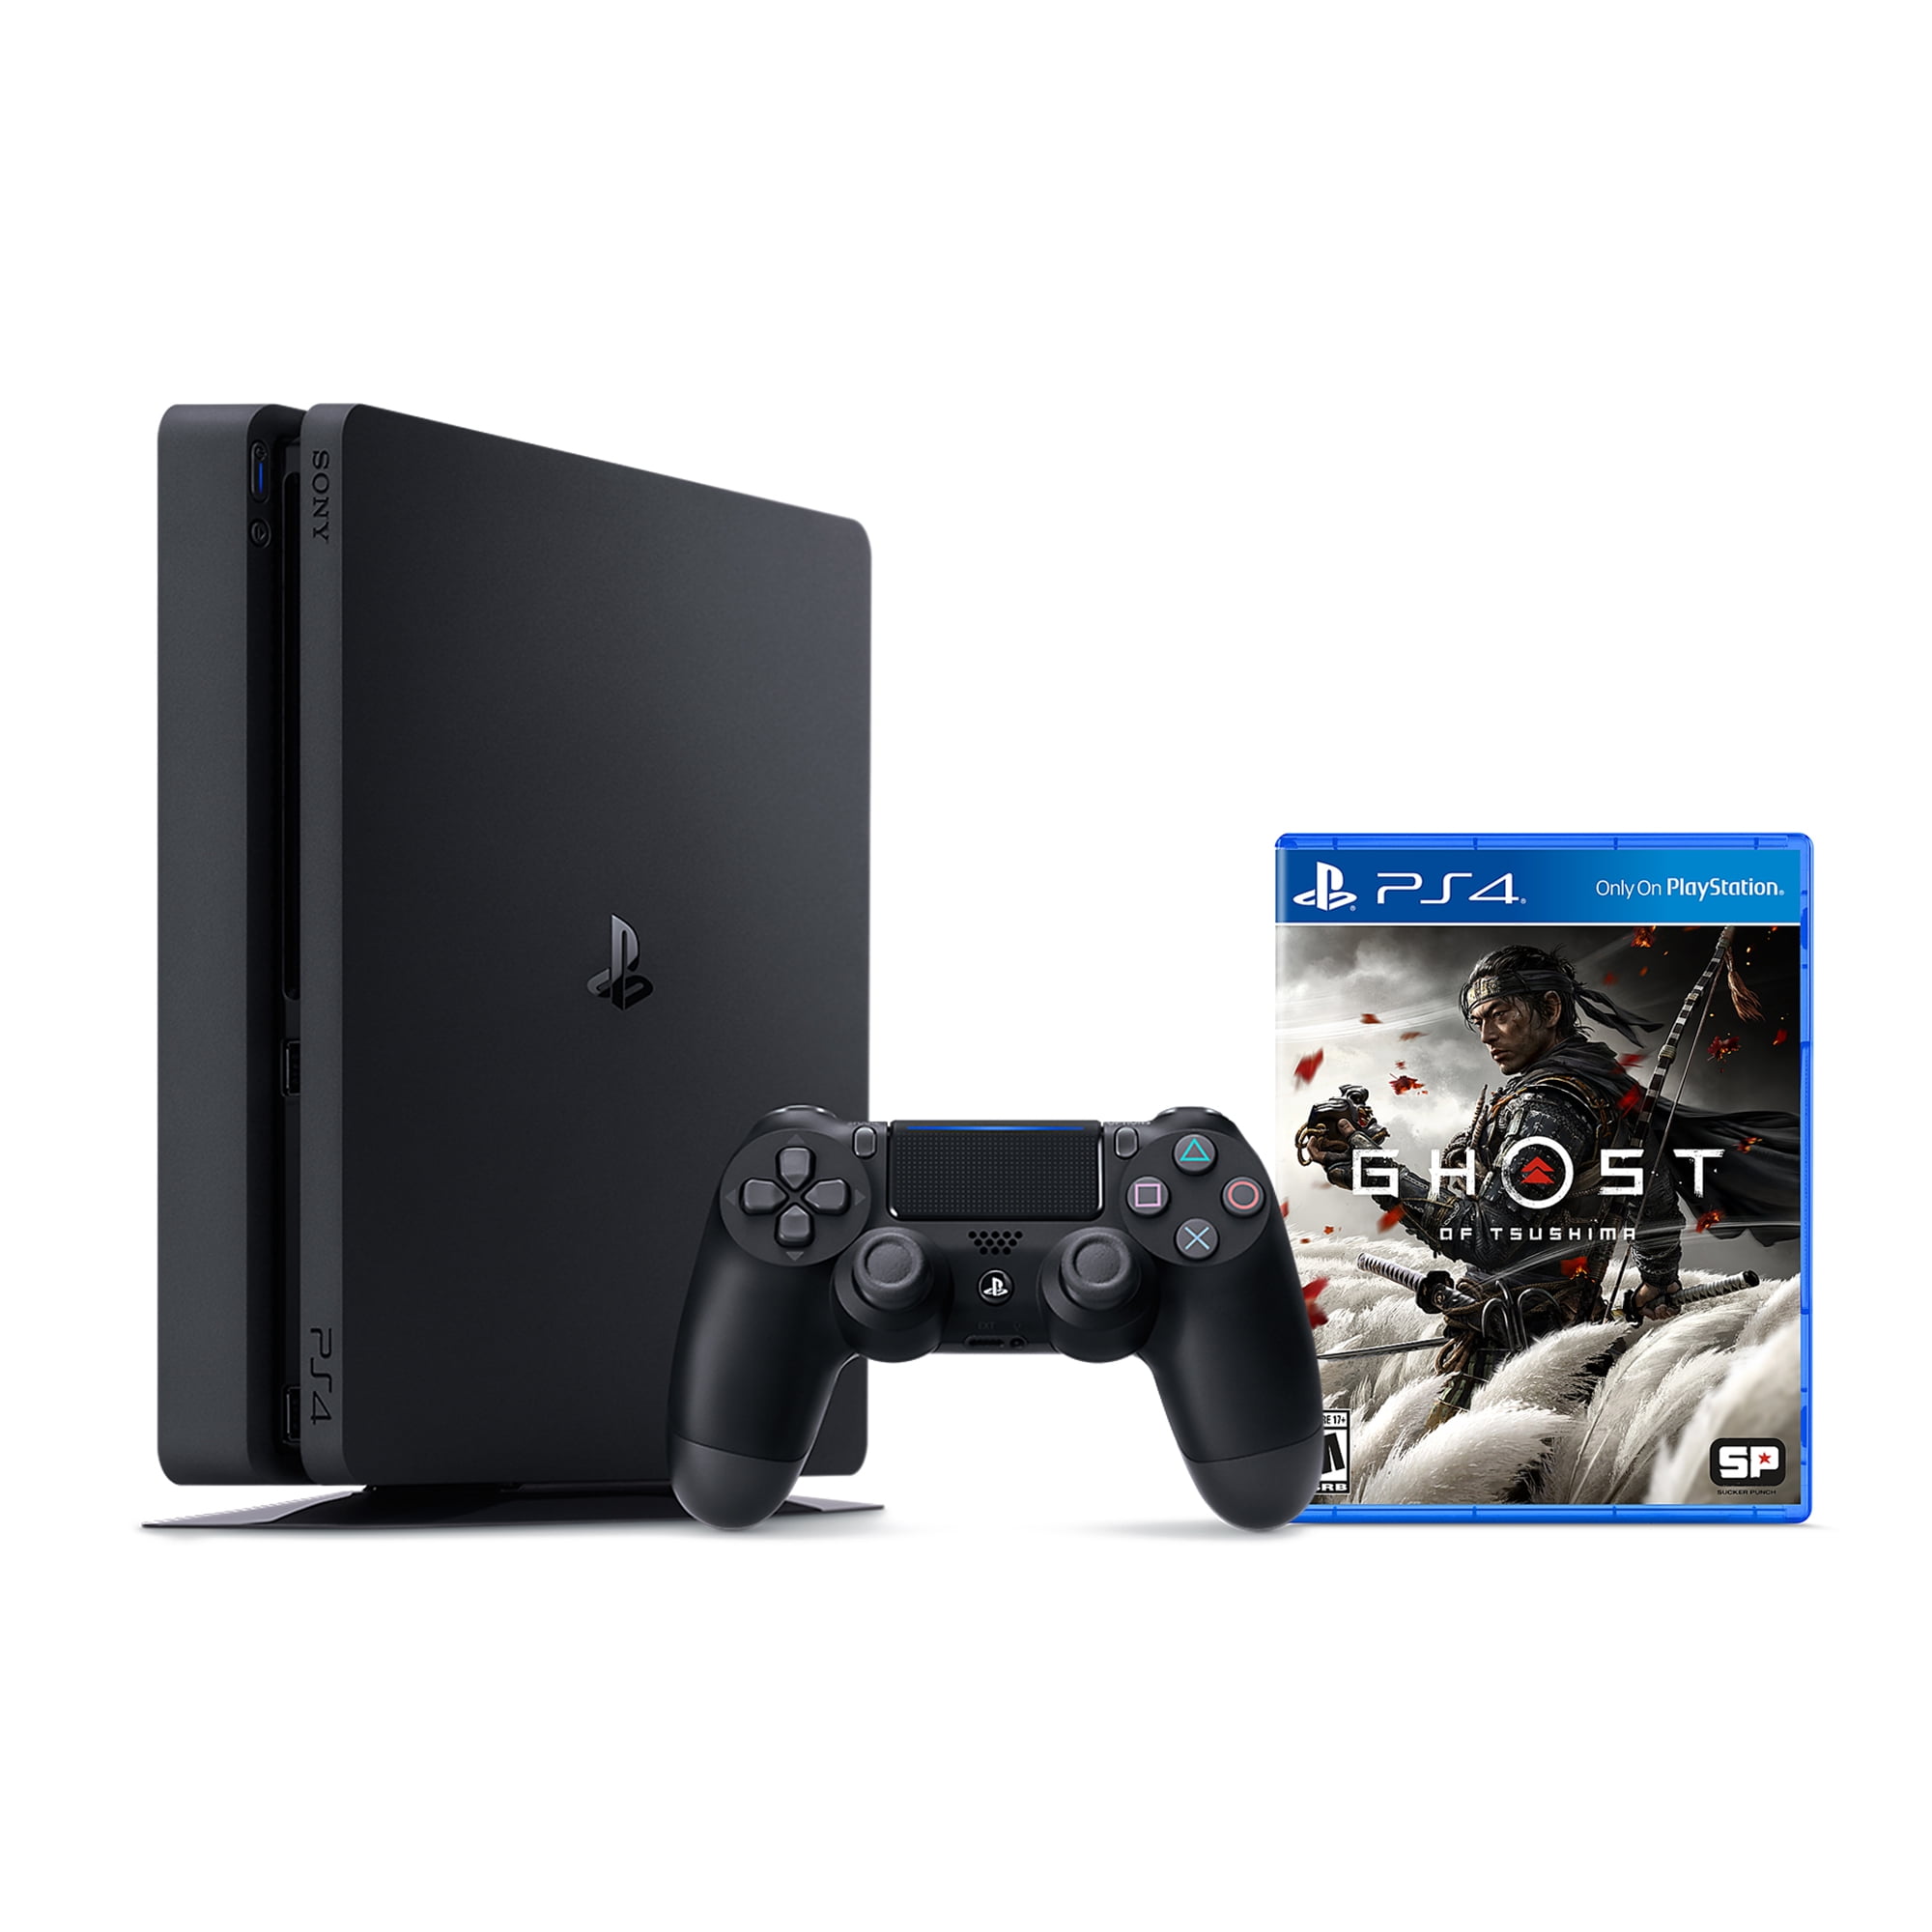 PlayStation 4 1TB Console with Ghost of Tsushima - PS4 Slim 1TB Jet Black HDR Console, Wireless Controller and Game Walmart.com